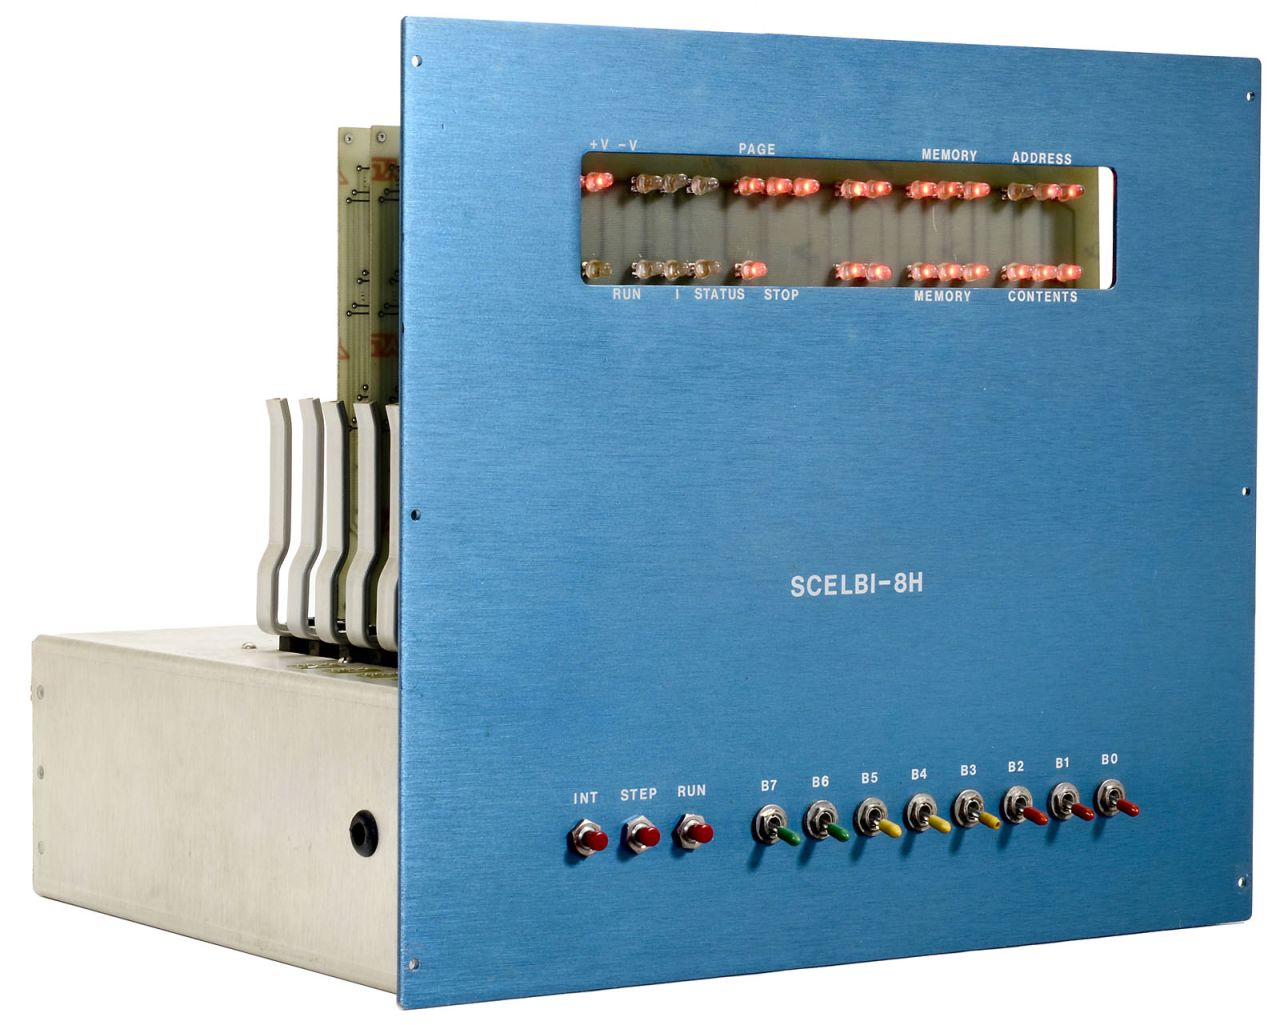 The Scelbi-8H was built around the first Intel 8-Bit microprocessor, and fell within the budget of an average person. It was available either assembled or in kit form. It was regarded as one of the first truly 'personal computers'.